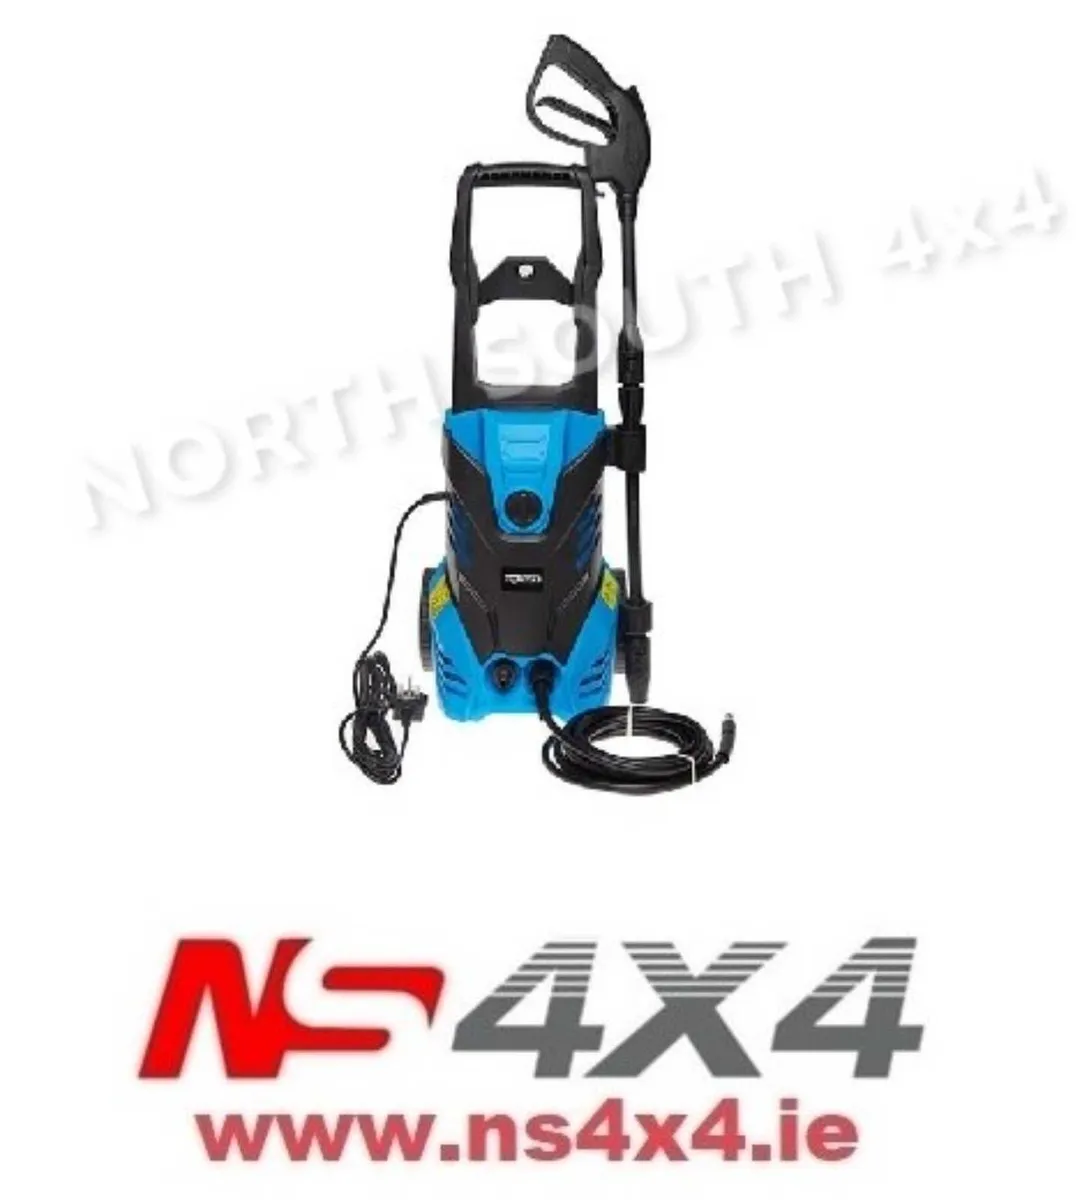 TOP TECH 1800W PRESSURE WASHER WITH INTERNAL DETER - Image 1